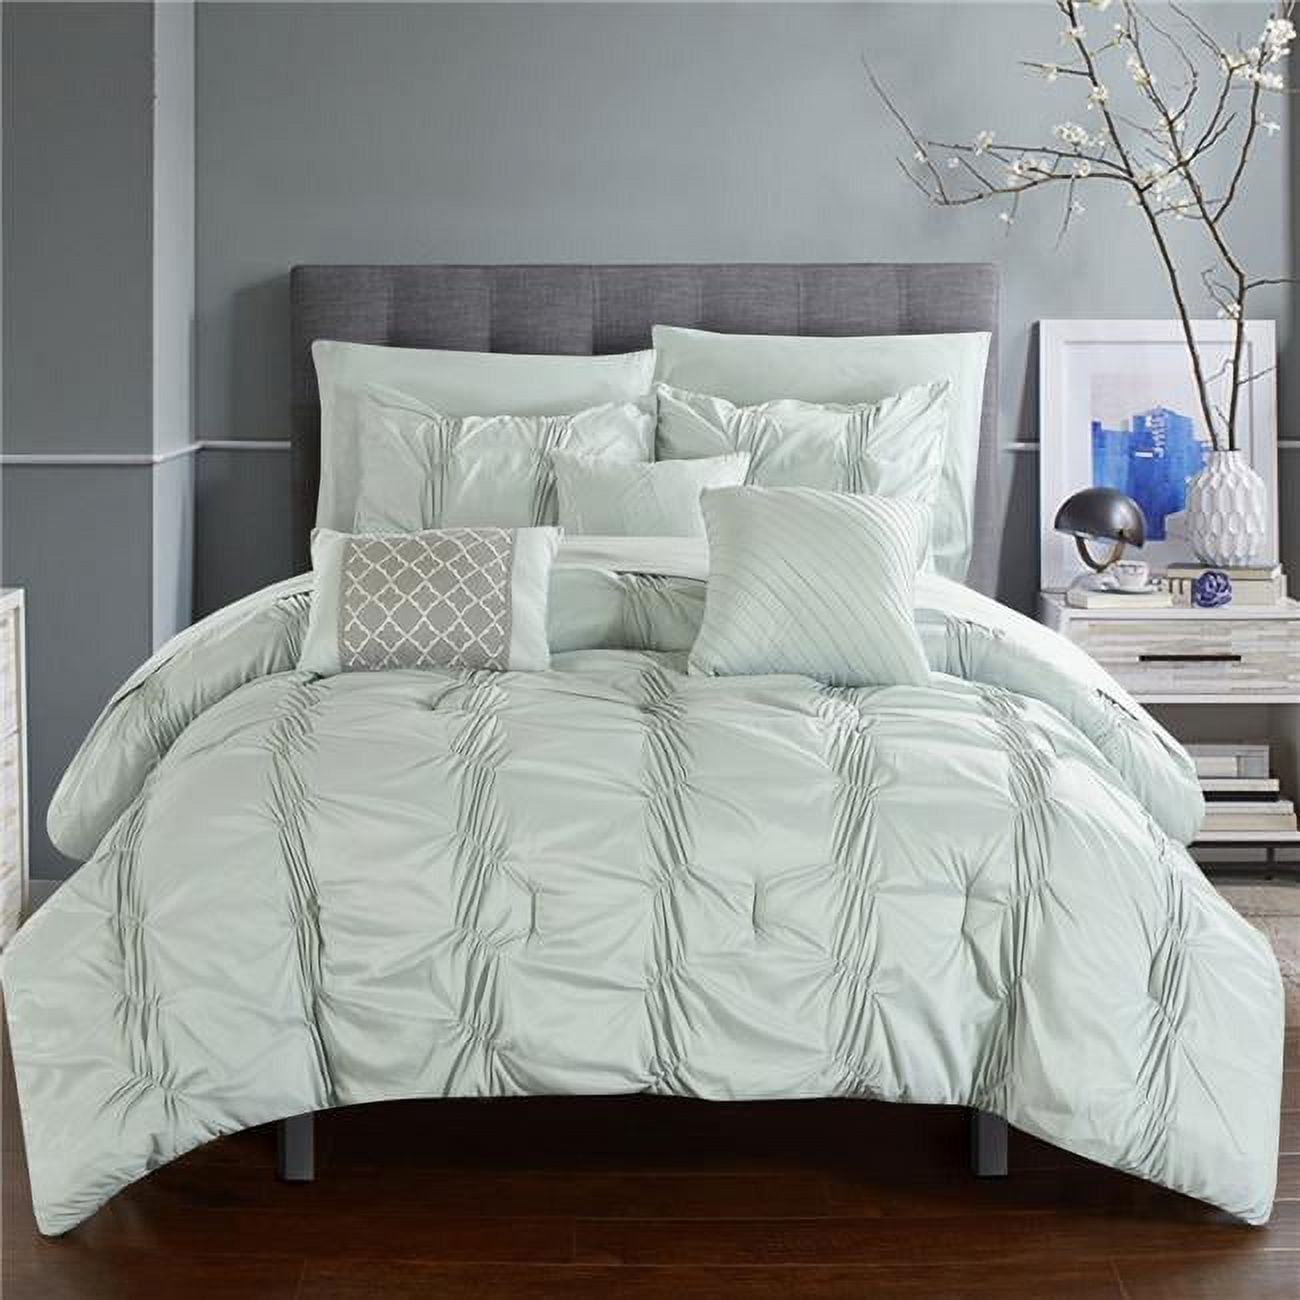 Cs2567-us Aryan Pinch Pleated, Ruffled & Pleated Complete Bed In A Bag Comforter Set With Sheets & Decorative Pillows - Green - Queen - 10 Piece